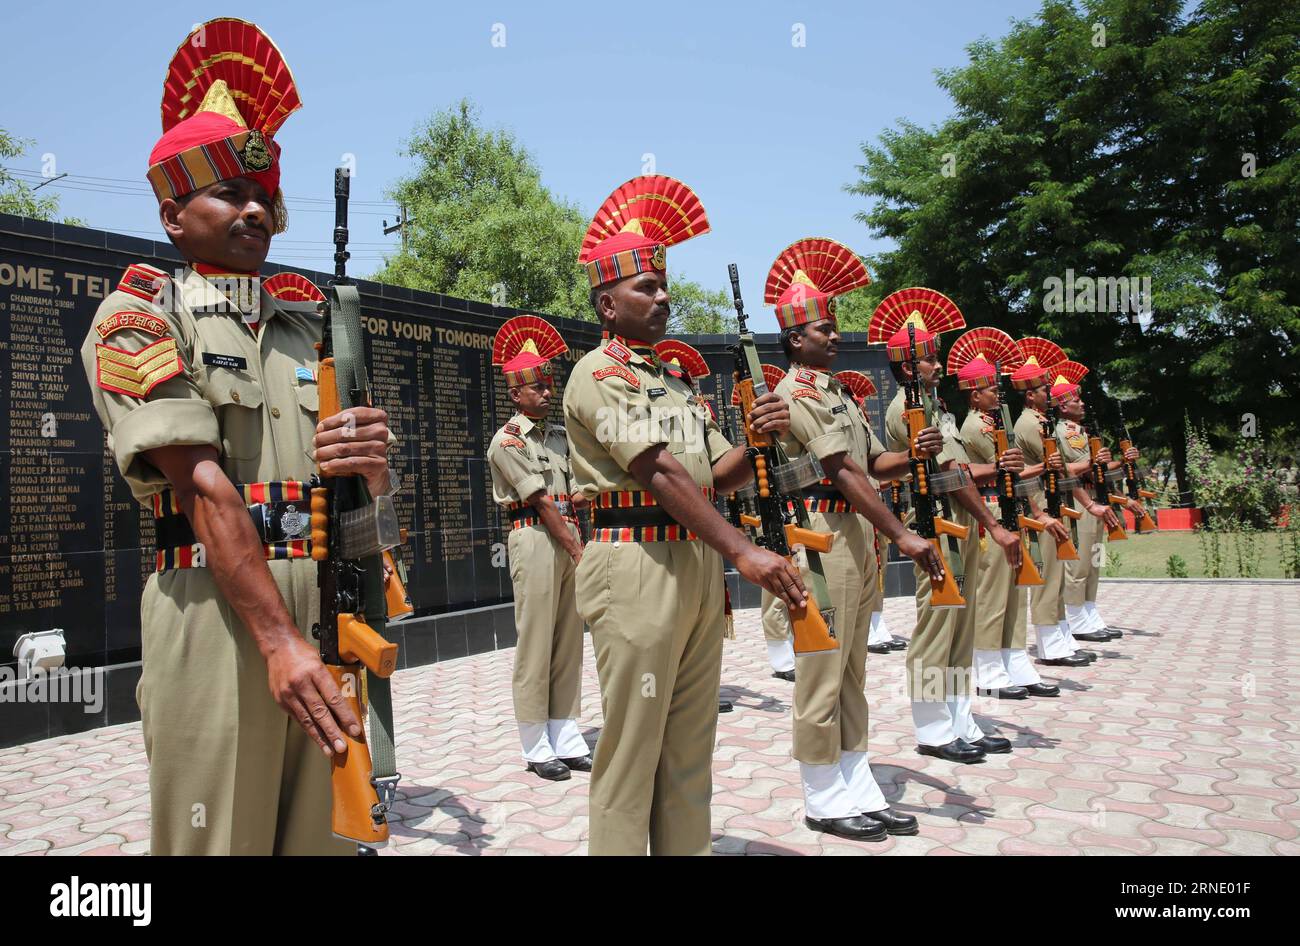 (160604) -- SRINAGAR, June 4, 2016 -- Indian border guards of India s Border Security Force (BSF) pay homage to slain border guards during a wreath laying ceremony at a BSF camp in the outskirts of Srinagar, summer capital of Indian-controlled Kashmir, June 4, 2016. The militant attack on convoy of India s Border Security Force (BSF) on Friday left three border guards dead and nine others wounded, two of them critically, in restive Indian-controlled Kashmir, officials said. ) (cyc) INDIA-KASHMIR-SRINAGAR-MILITANT ATTACK JavedxDar PUBLICATIONxNOTxINxCHN   160604 Srinagar June 4 2016 Indian Bord Stock Photo